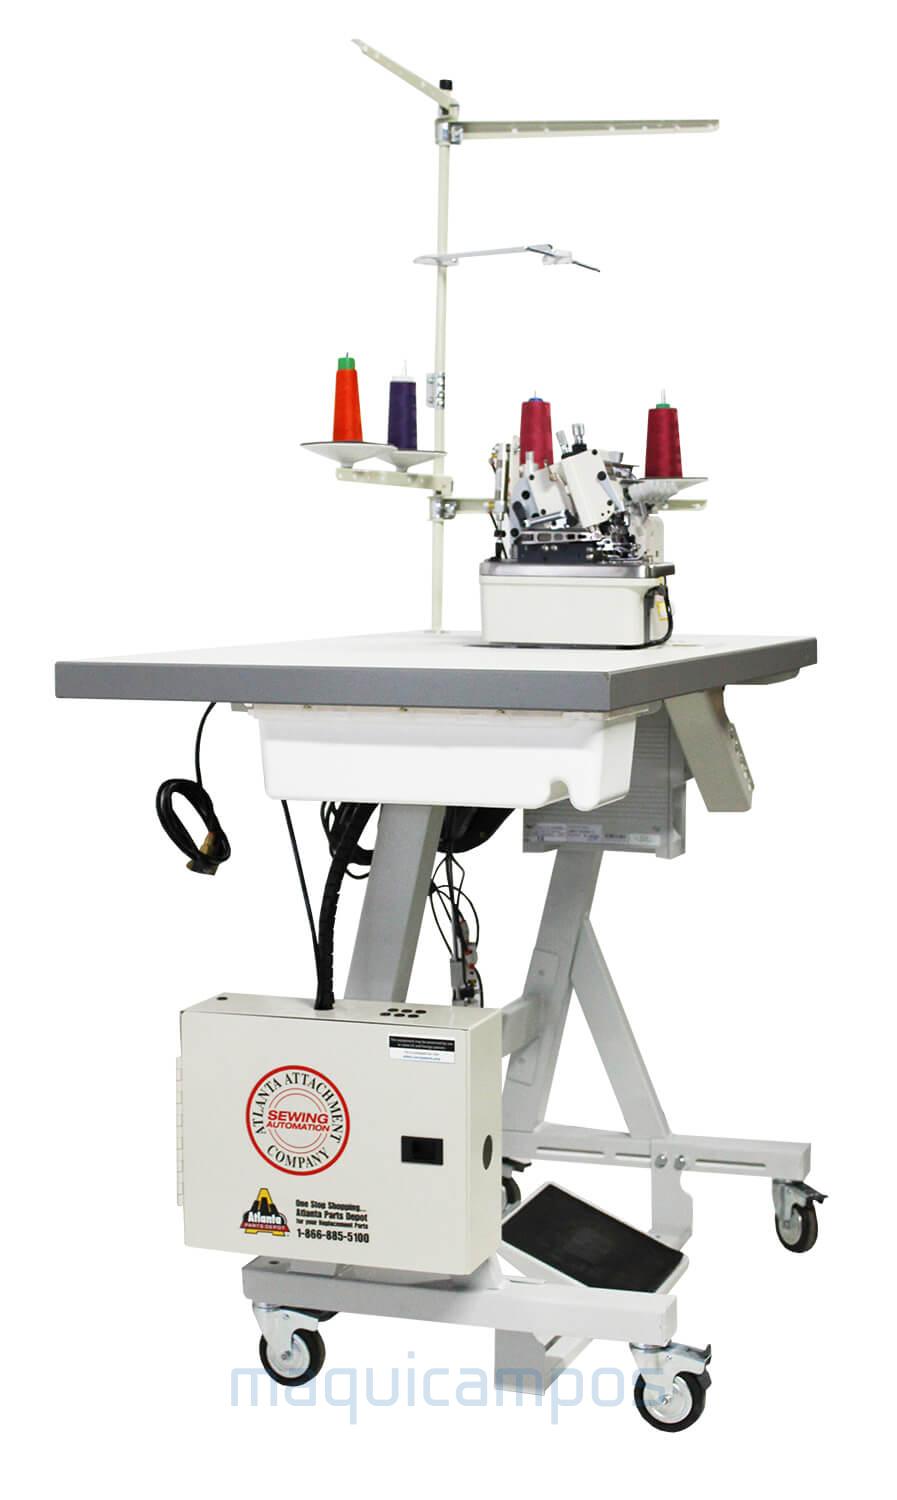 Pegasus EXT5214H-55 525K-2x4 / Z054 Overlock Sewing Machine with BL Kit for Extra Fabrics